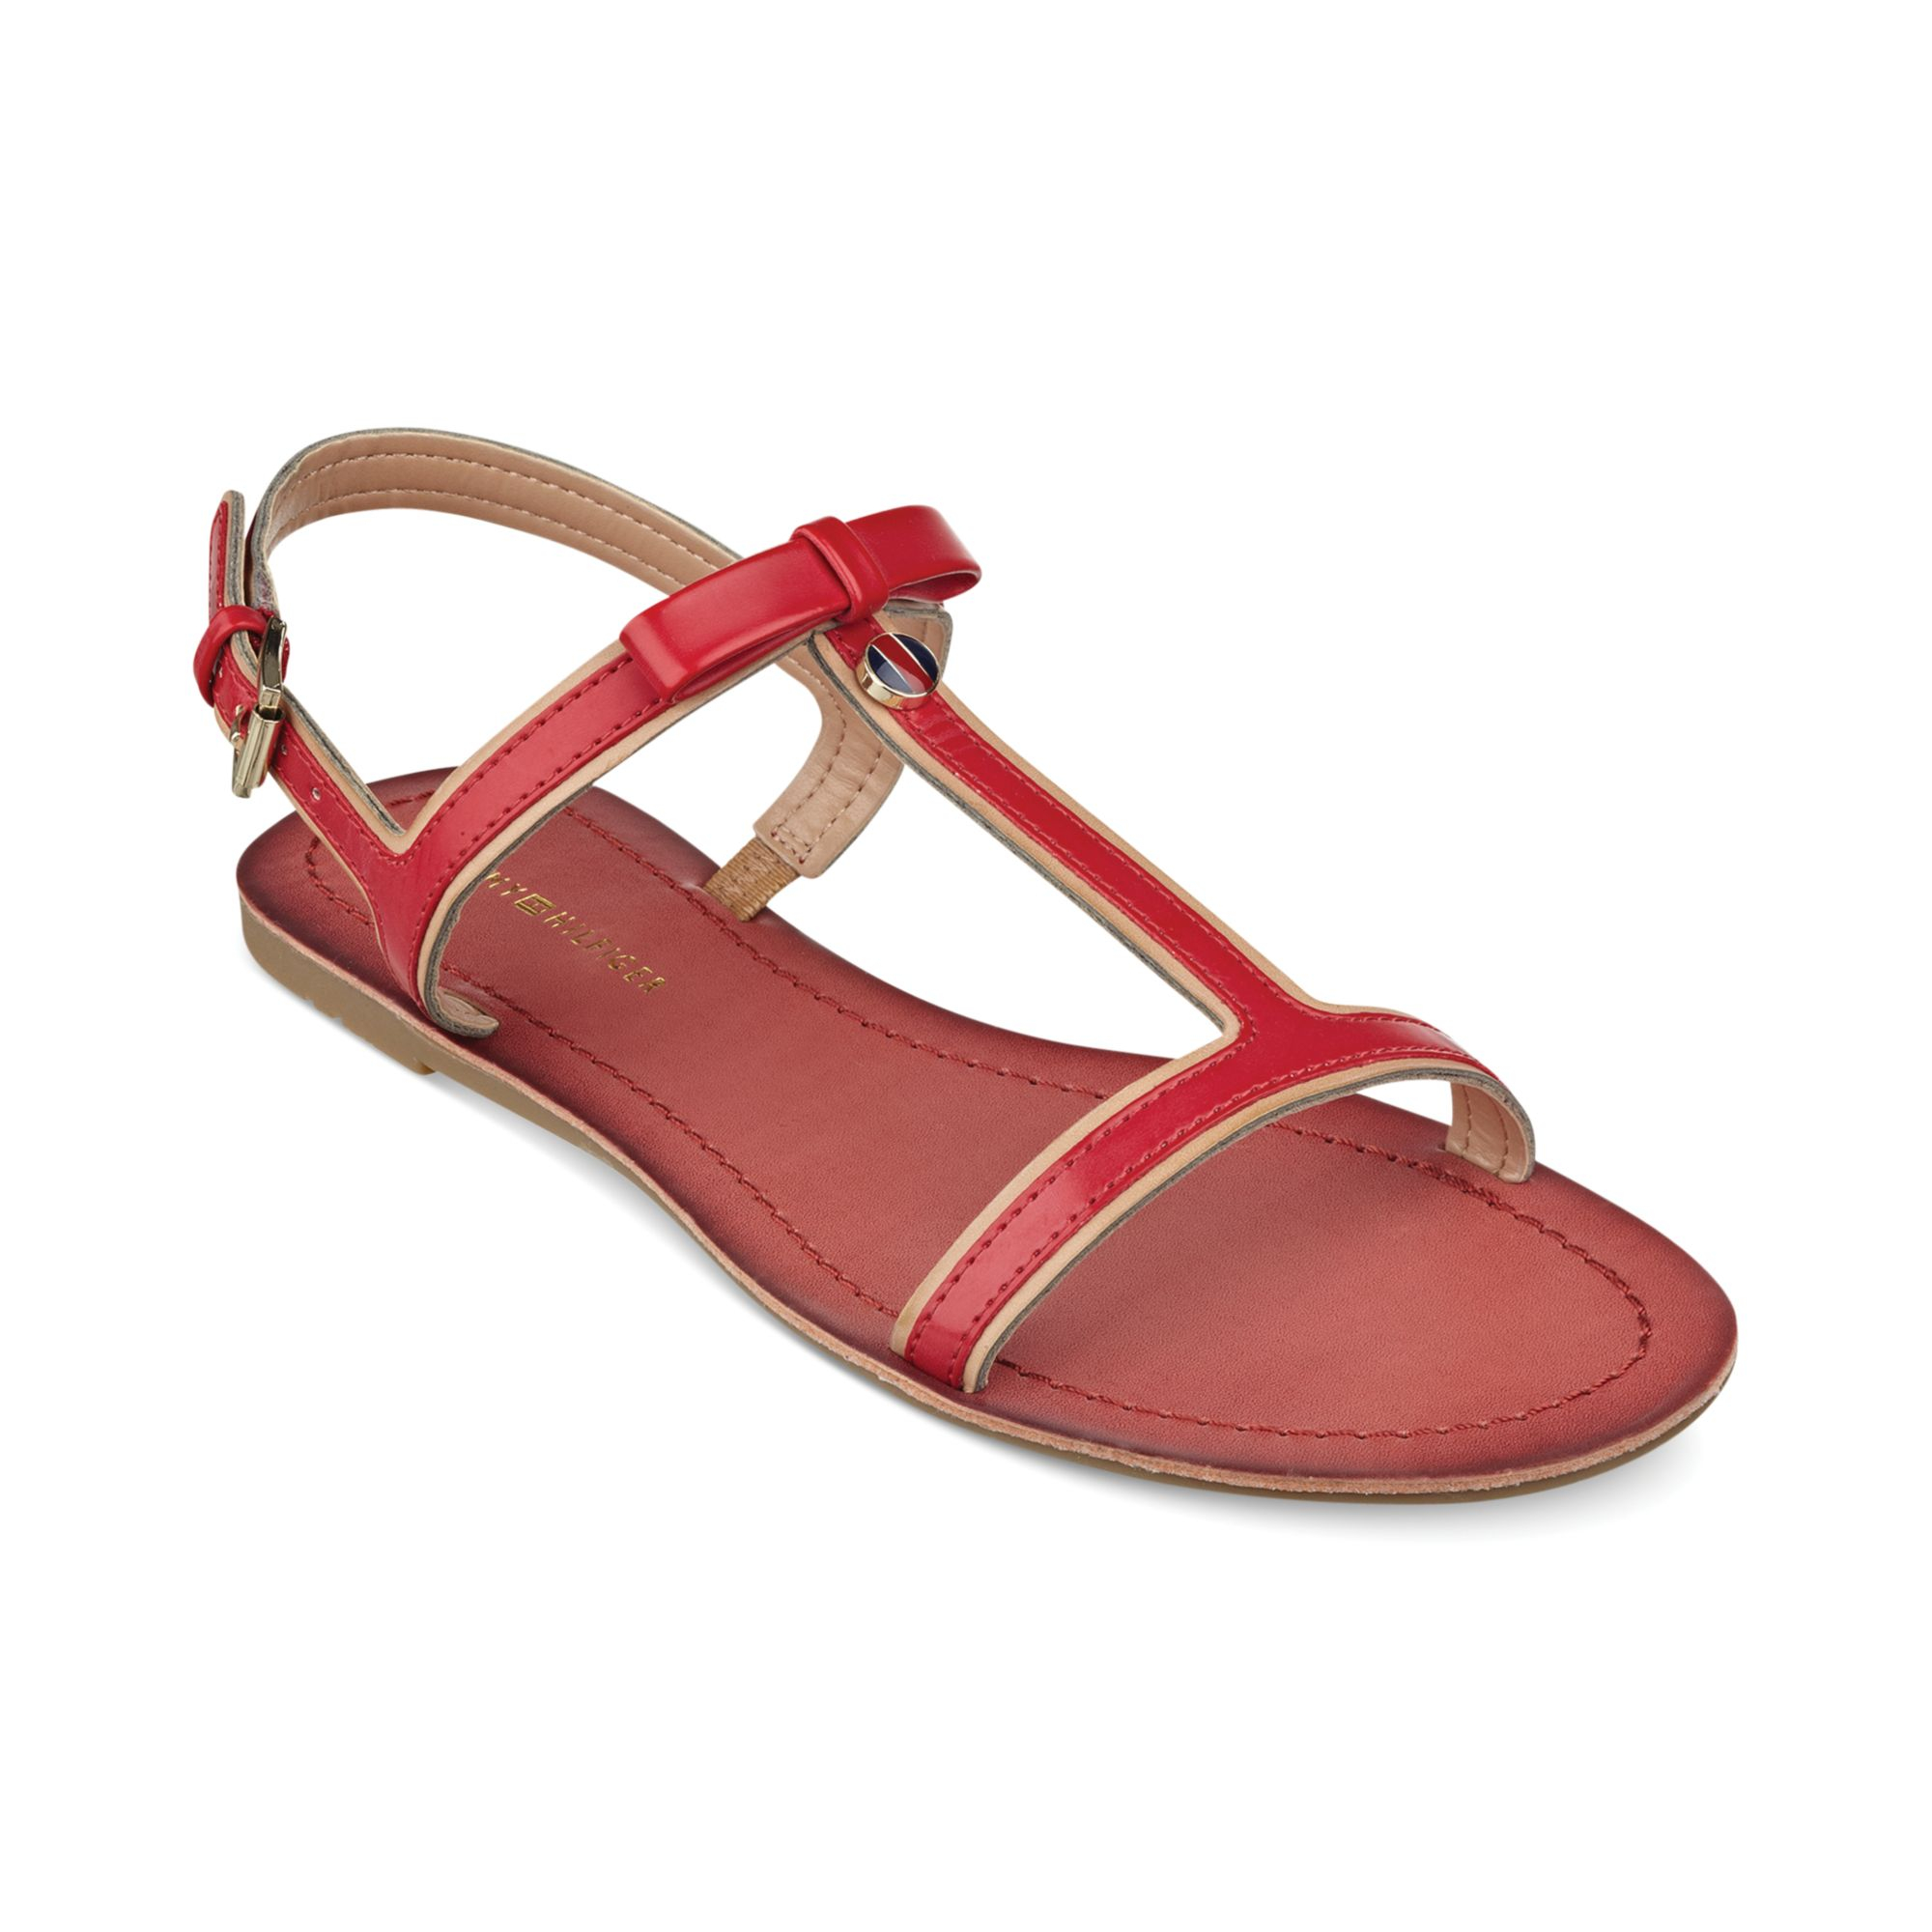 Lyst - Tommy Hilfiger Womens Lisel Flat Sandals in Red